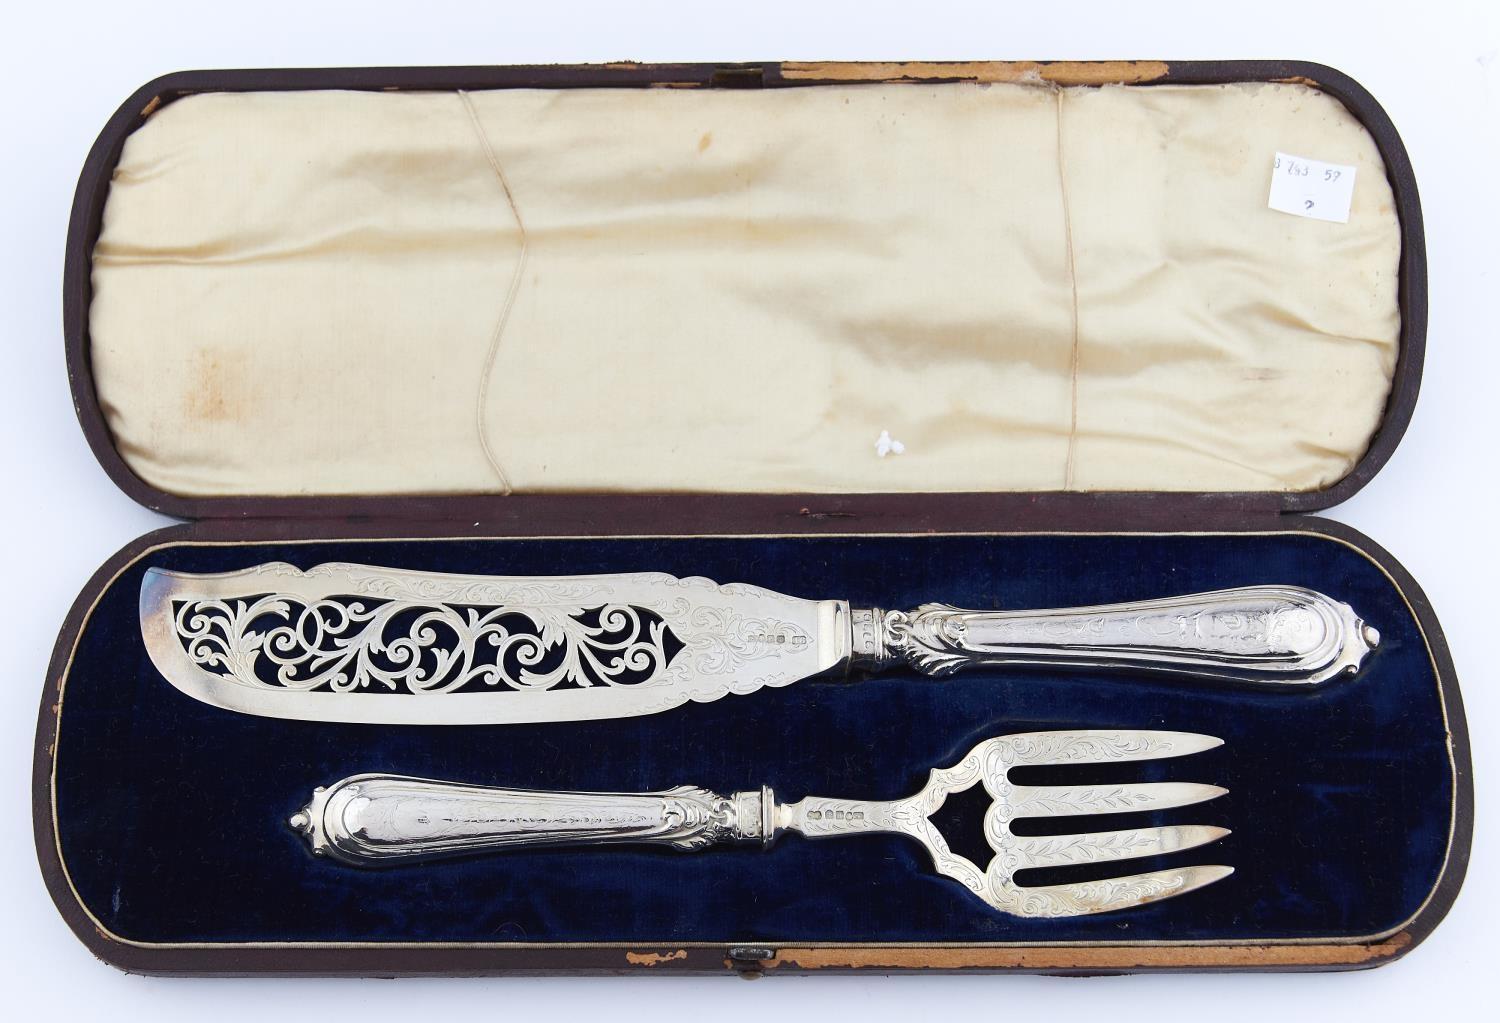 A PAIR OF VICTORIAN PIERCED AND ENGRAVED SILVER FISH SERVERS, MAKER JG, BIRMINGHAM 1853, CASED